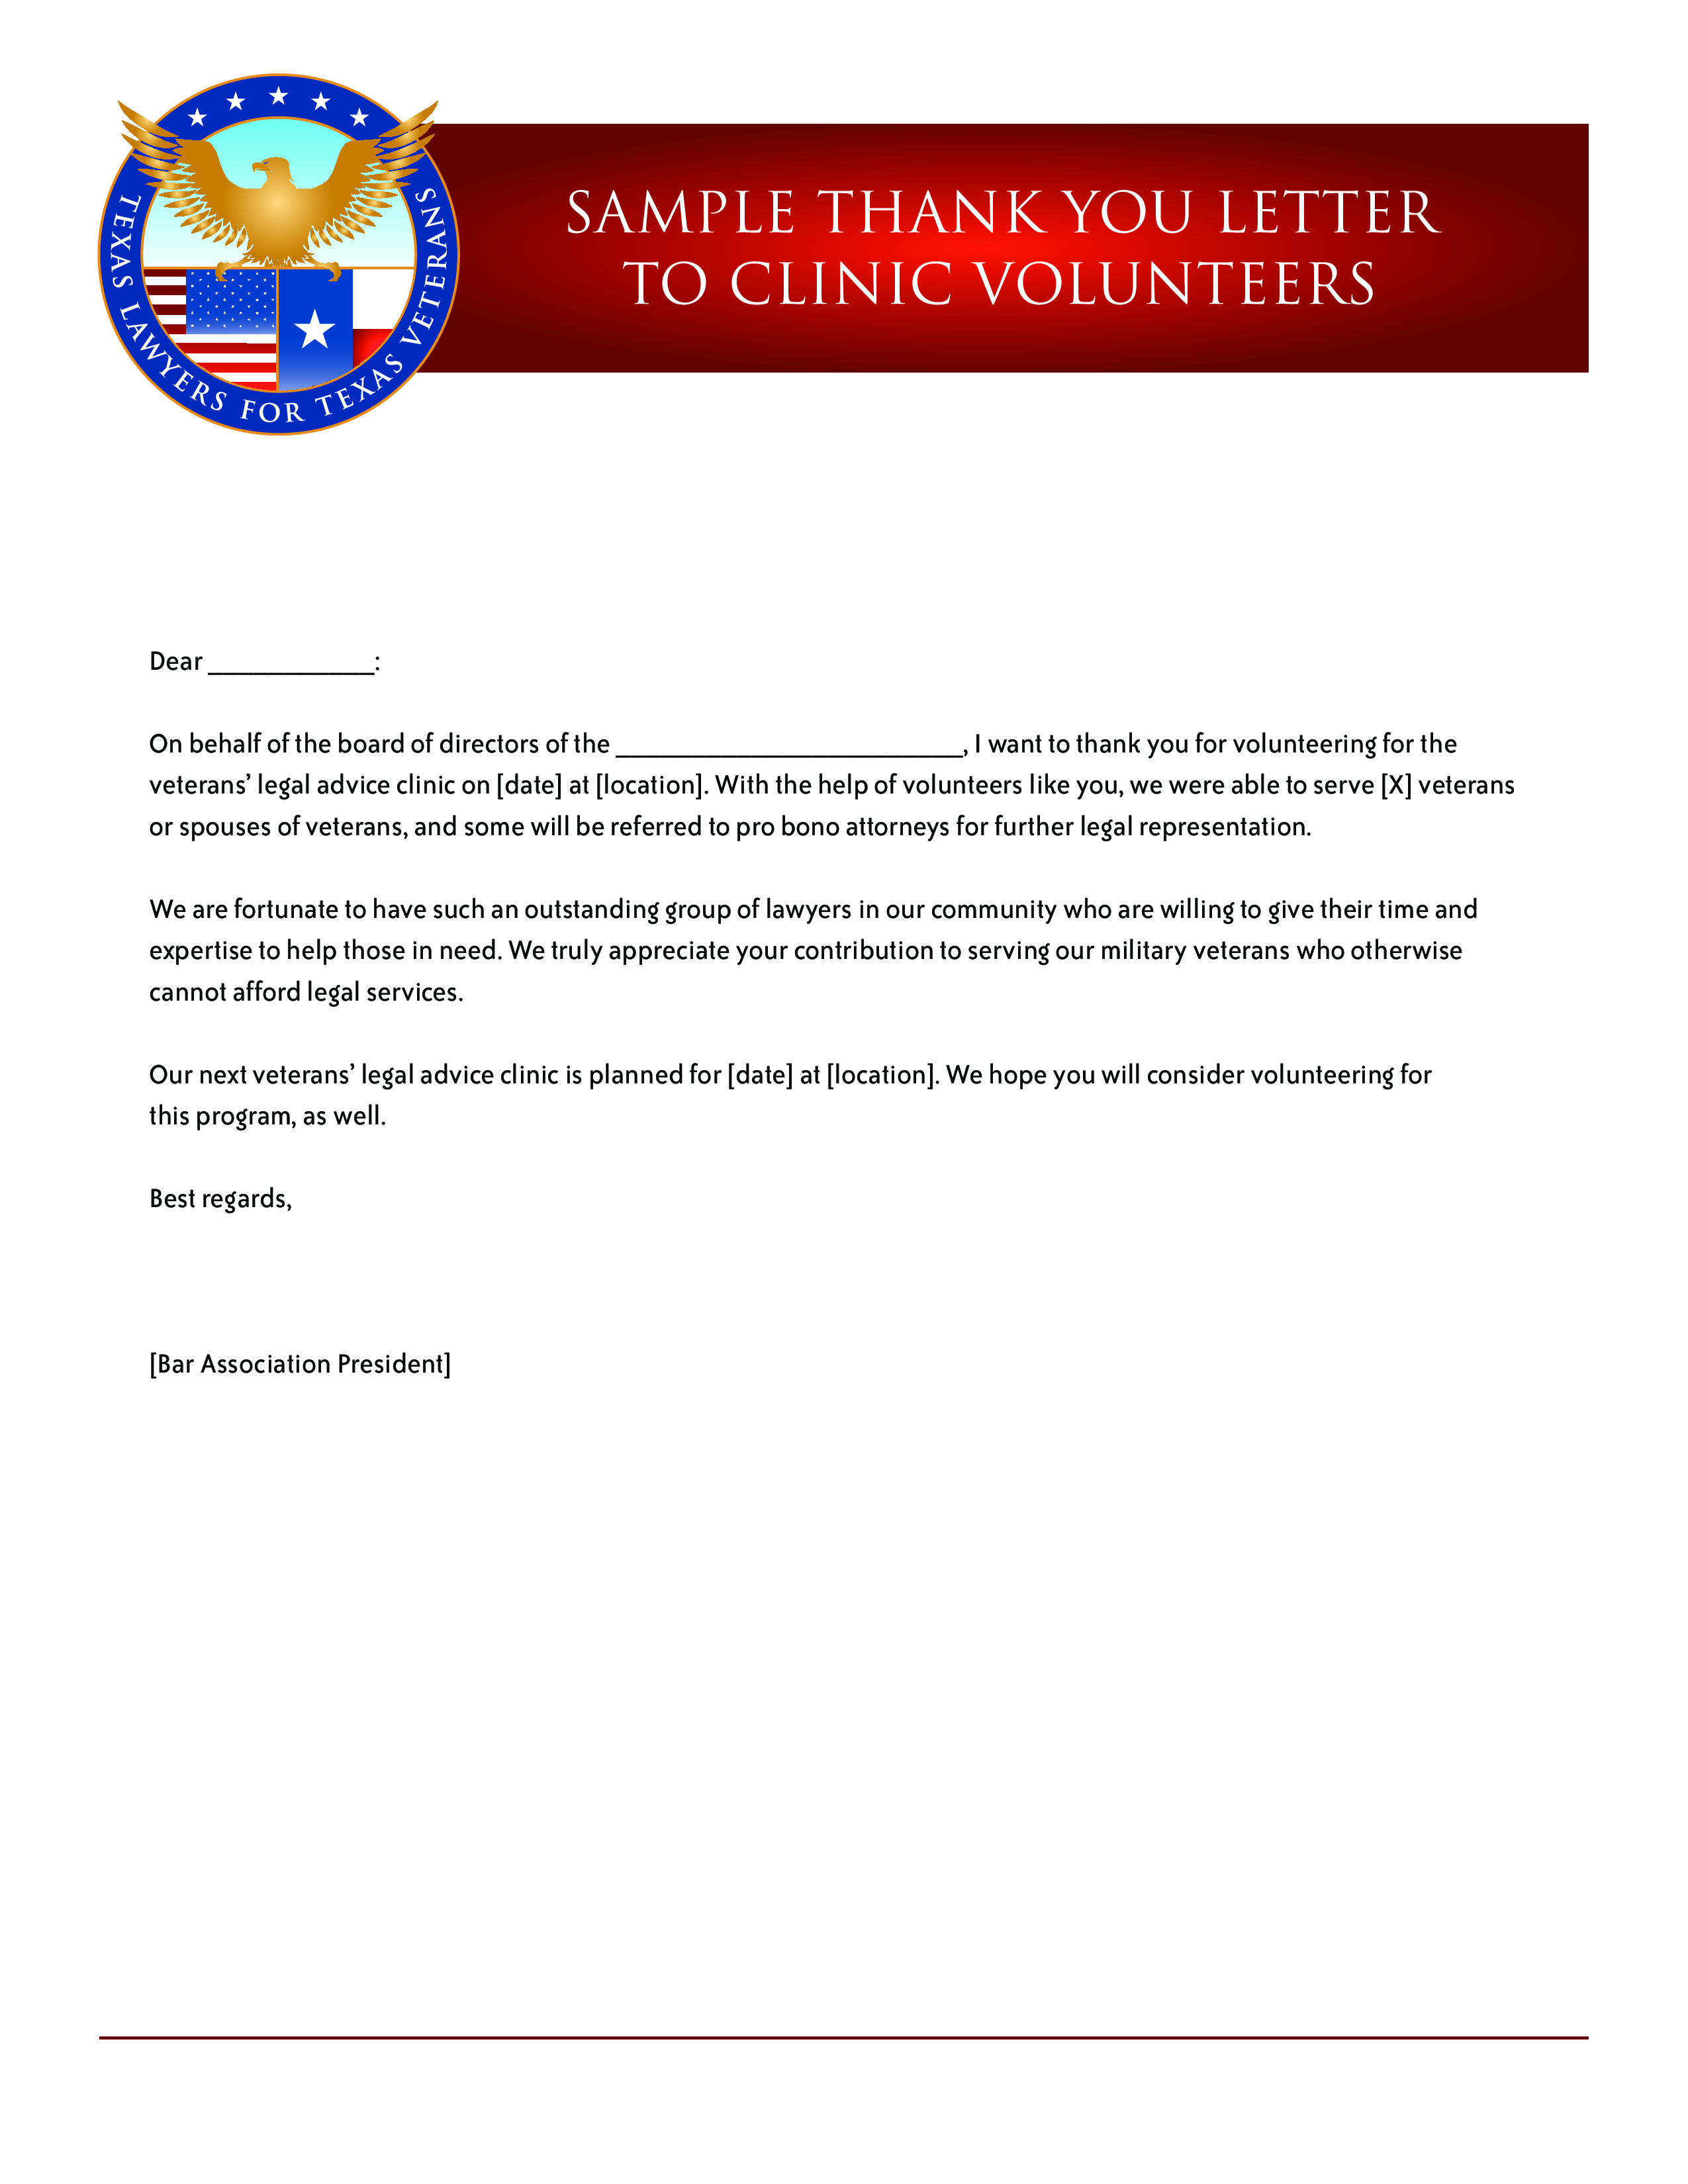 Clinic Volunteer Thank You Letter 模板